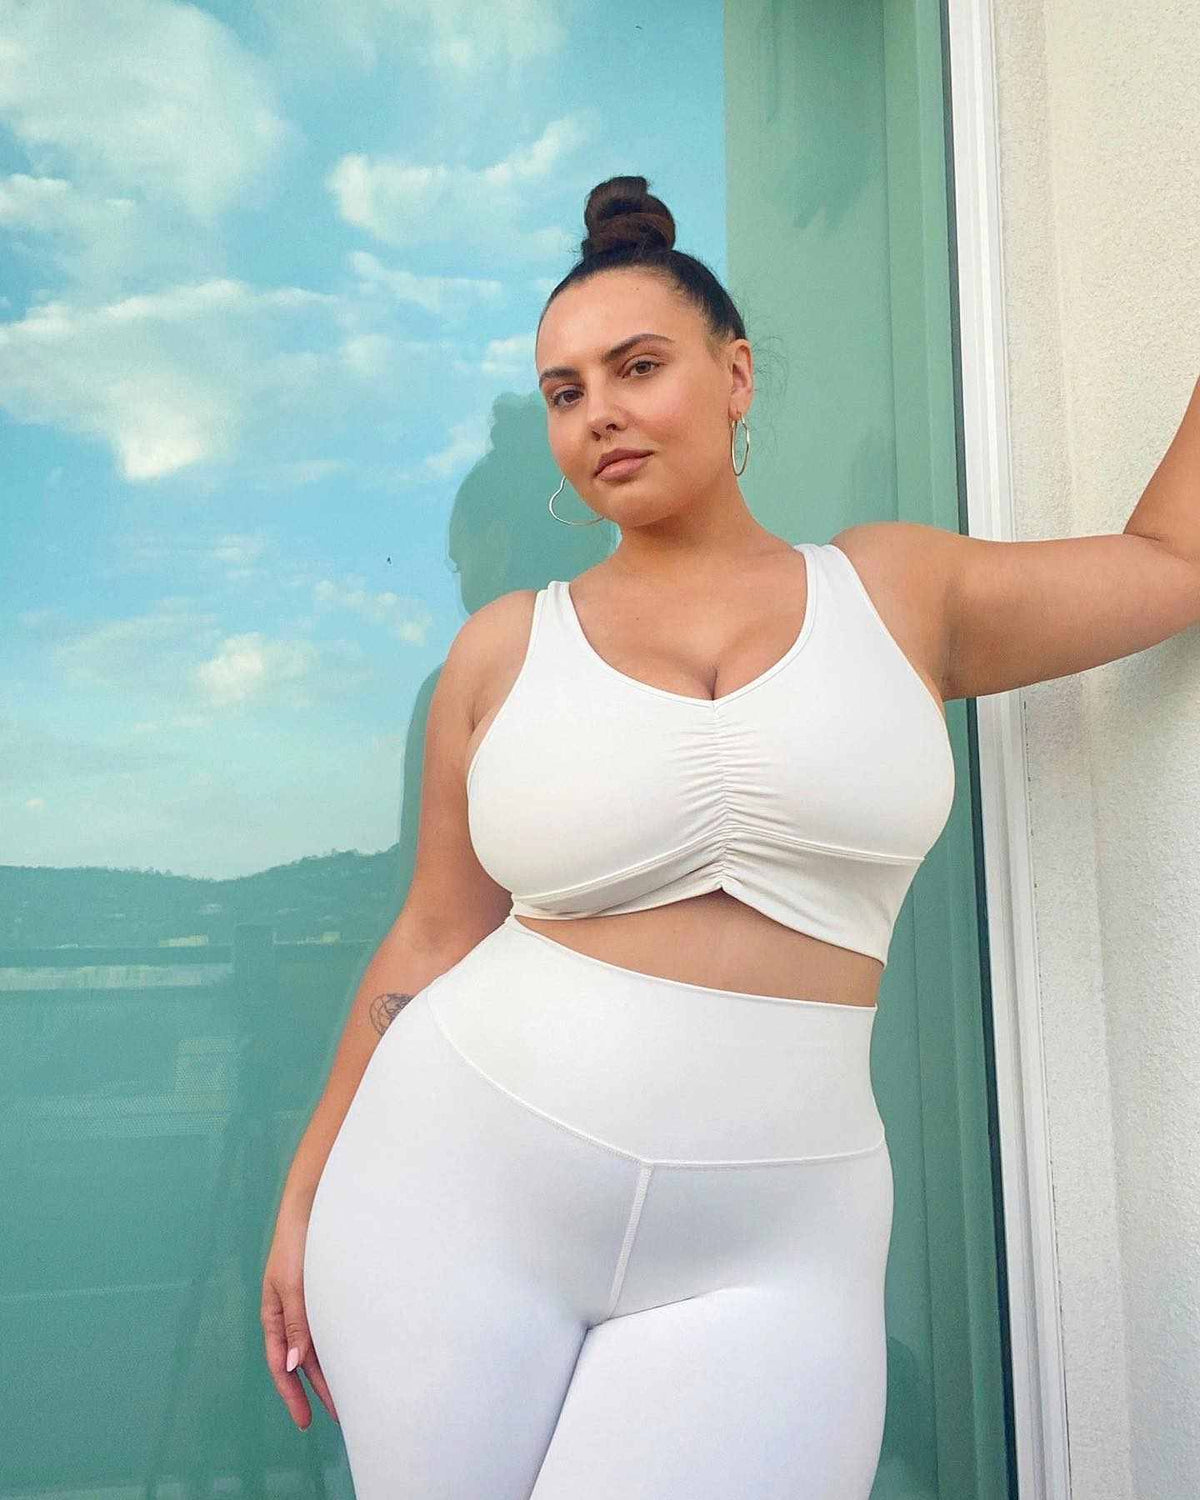 Anna Krylova wearing the Ivory Wild Thing Bra with Ivory High Waist Airbrush Leggings while posing in front of a window reflecting a blue skies and white fluffy clouds.  